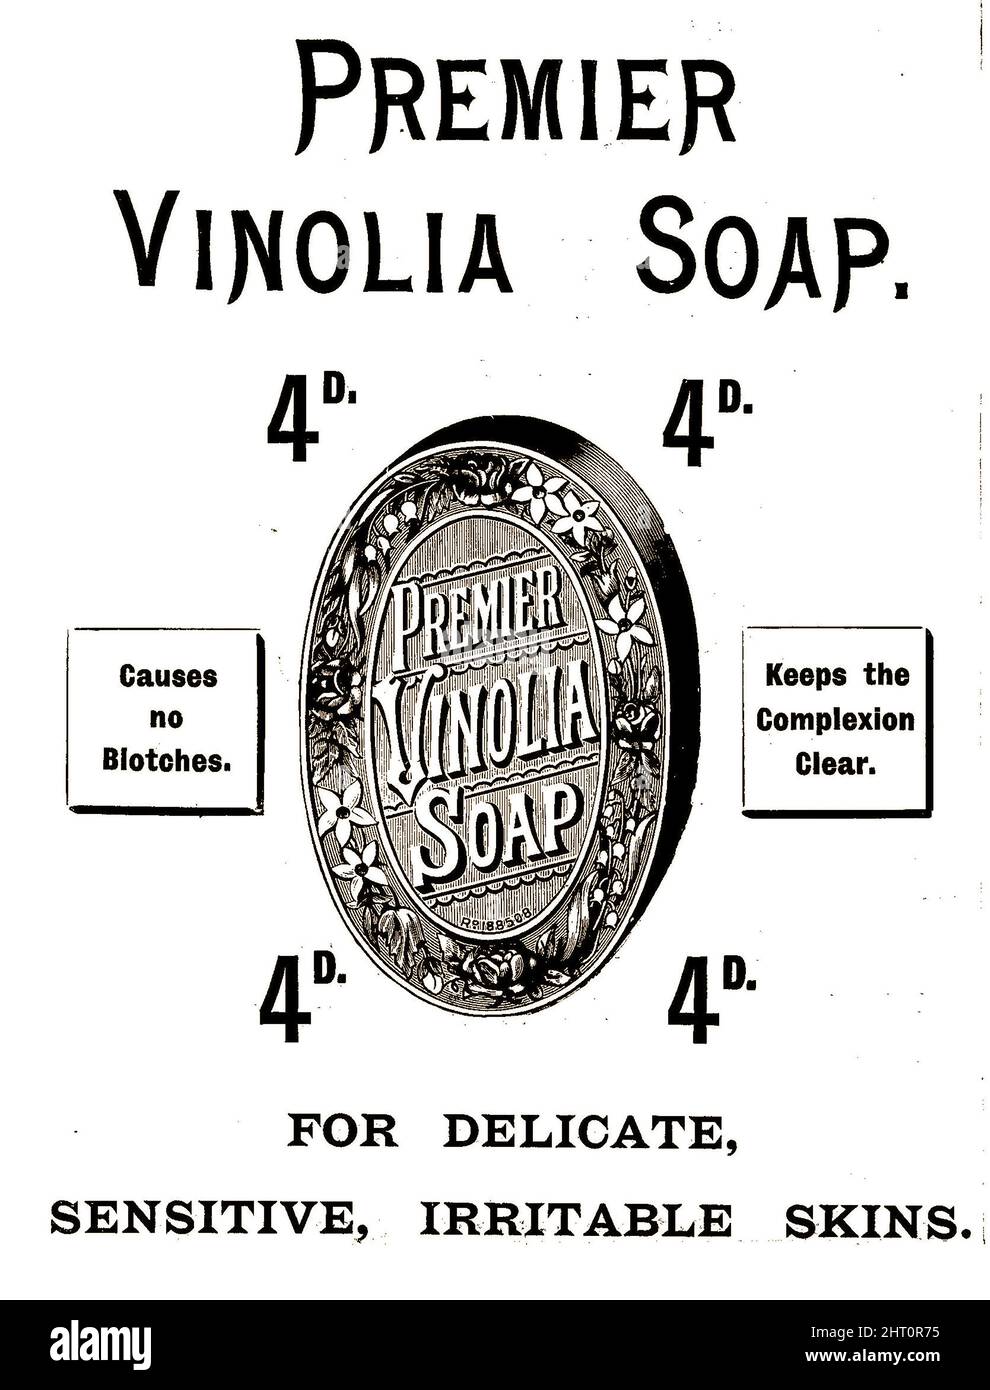 ADVERT Premier Vinolia Soap .1896. This oval shaped soap sold for 4d (four pence) a bar. It was known as  'The soap of the Titanic because the brand  was supplied on the vessel on its maiden voyage. It was branded as a  a 'toilet soap' meaning it was for personal use (as opposed to washing soaps), Originally a British company  called the Vinolia Co Ltd, it also made  baby powder, face powder, perfumes and shaving soap.  William Lever bought the company in 1906. Today. the brand name is owned by Unilever. Stock Photo